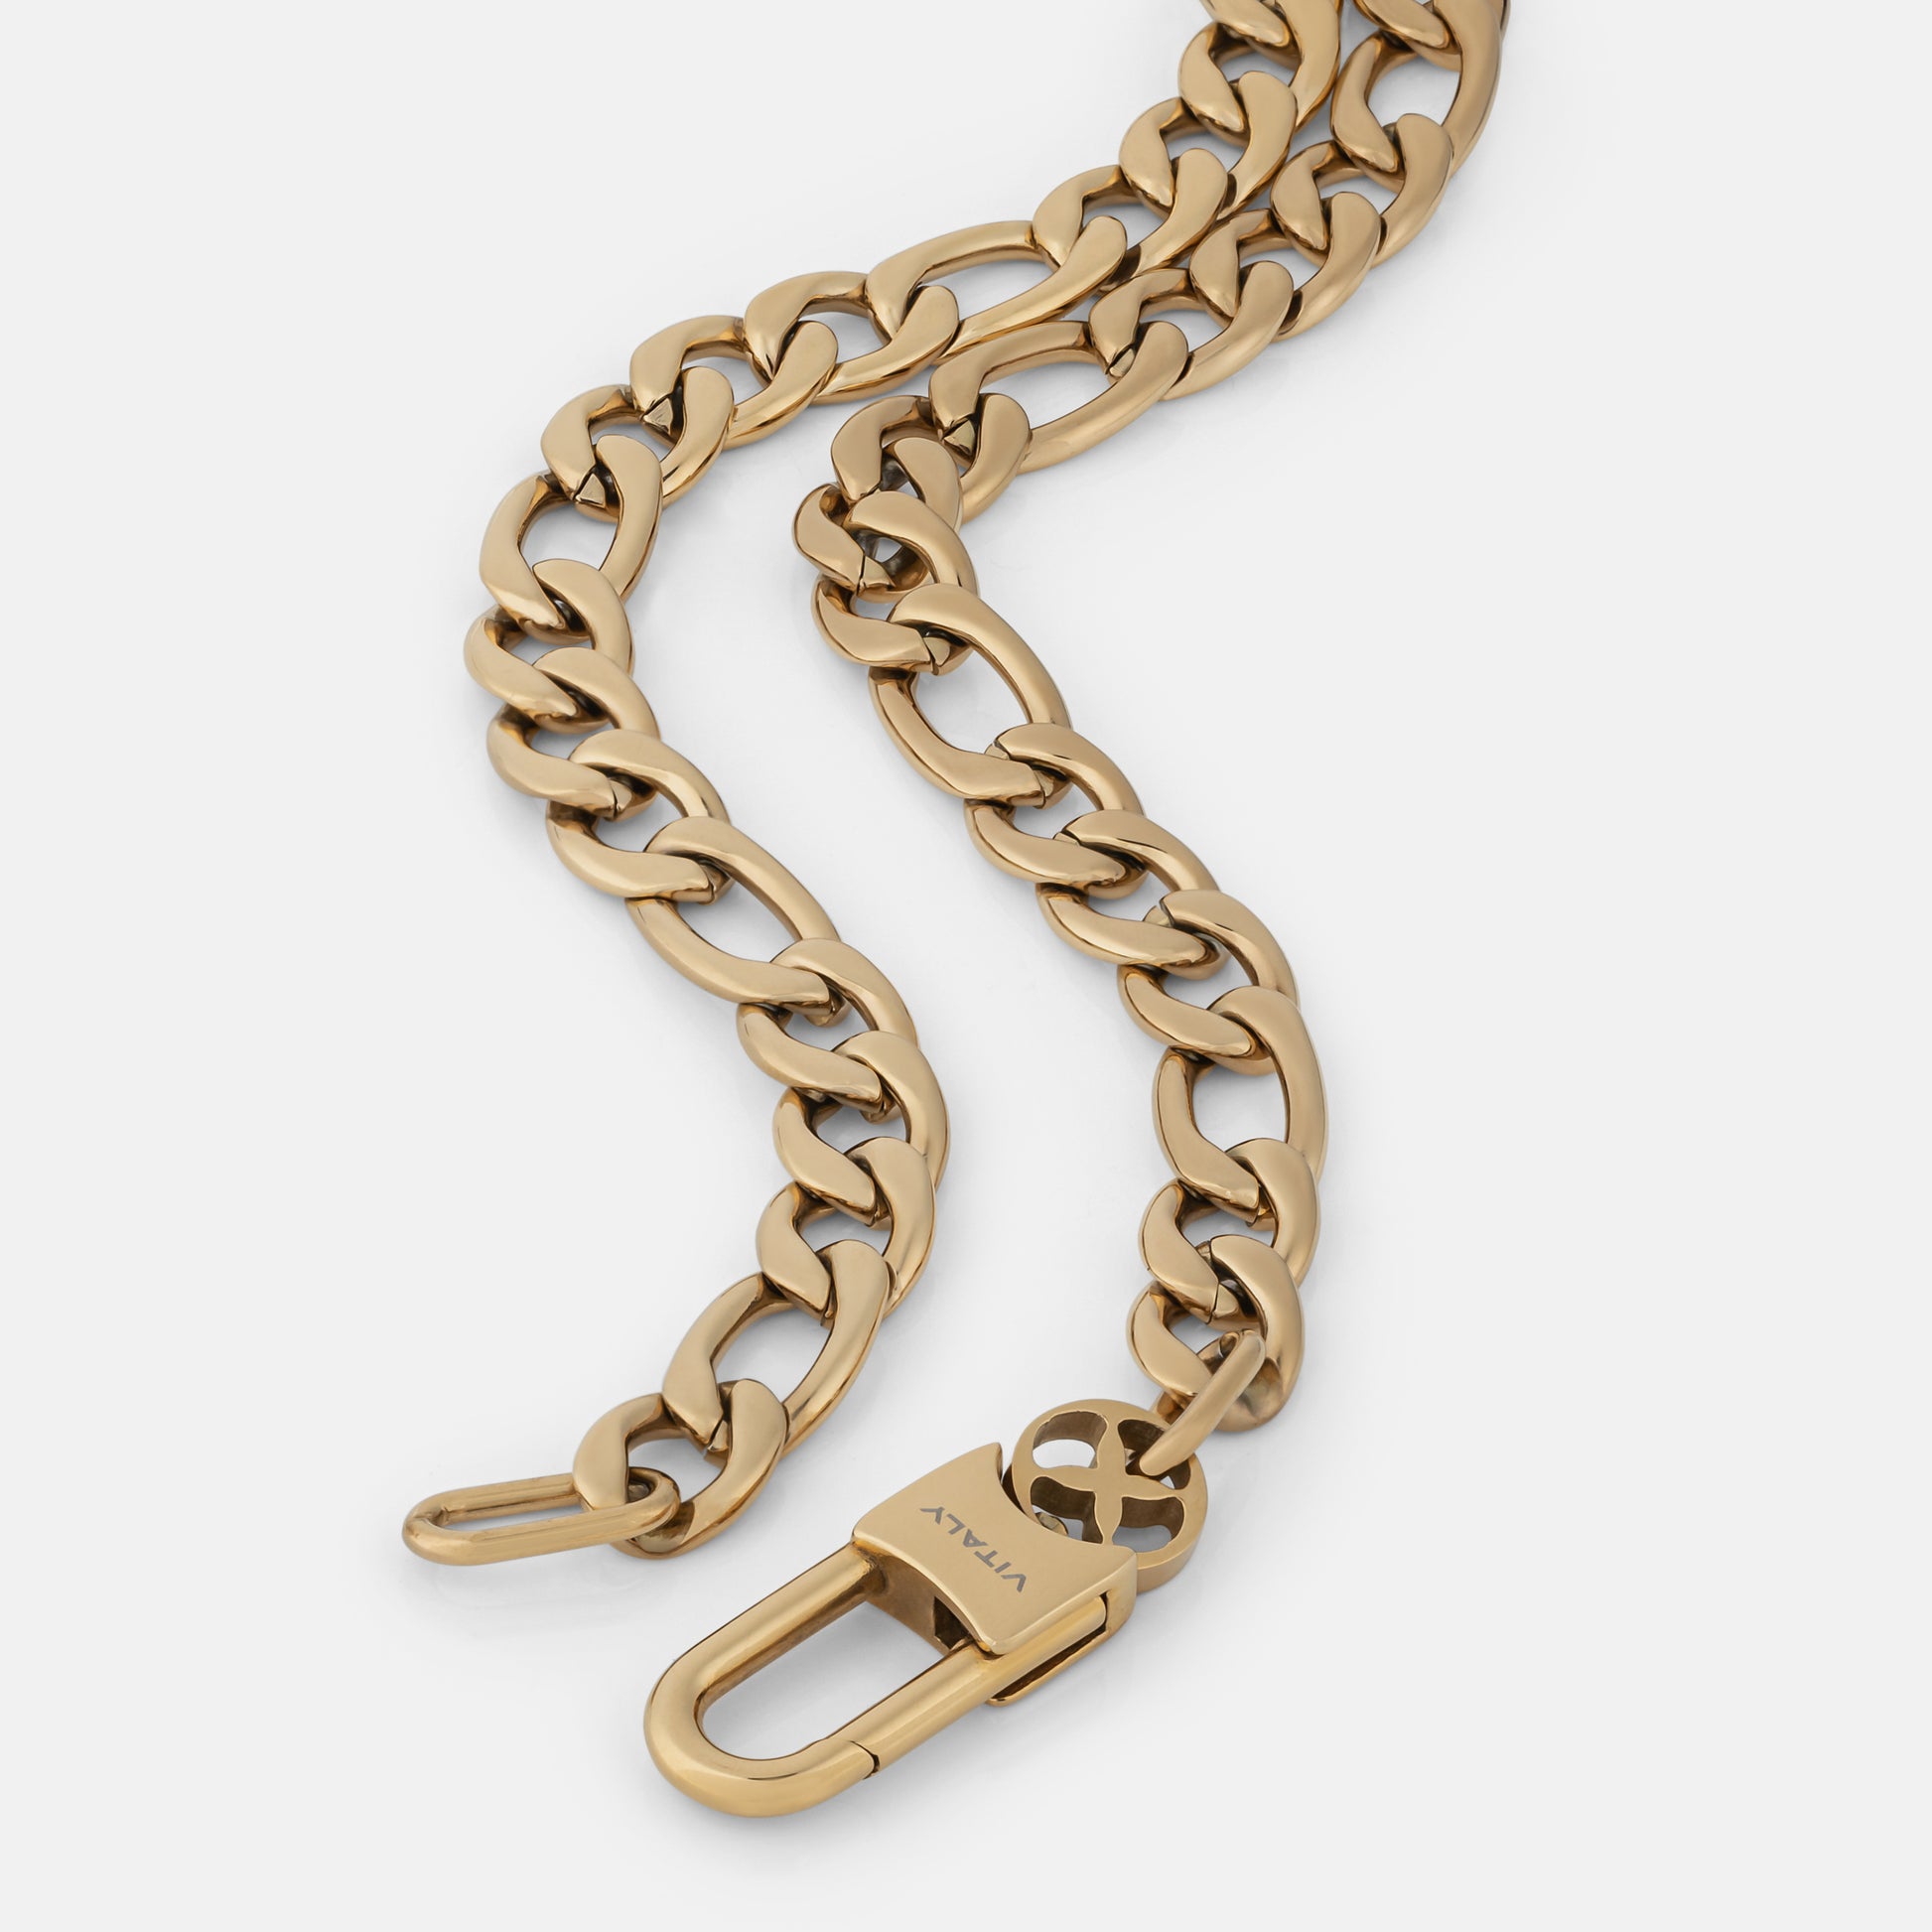 Vitaly Glide Chain  100% Recycled Stainless Steel Accessories